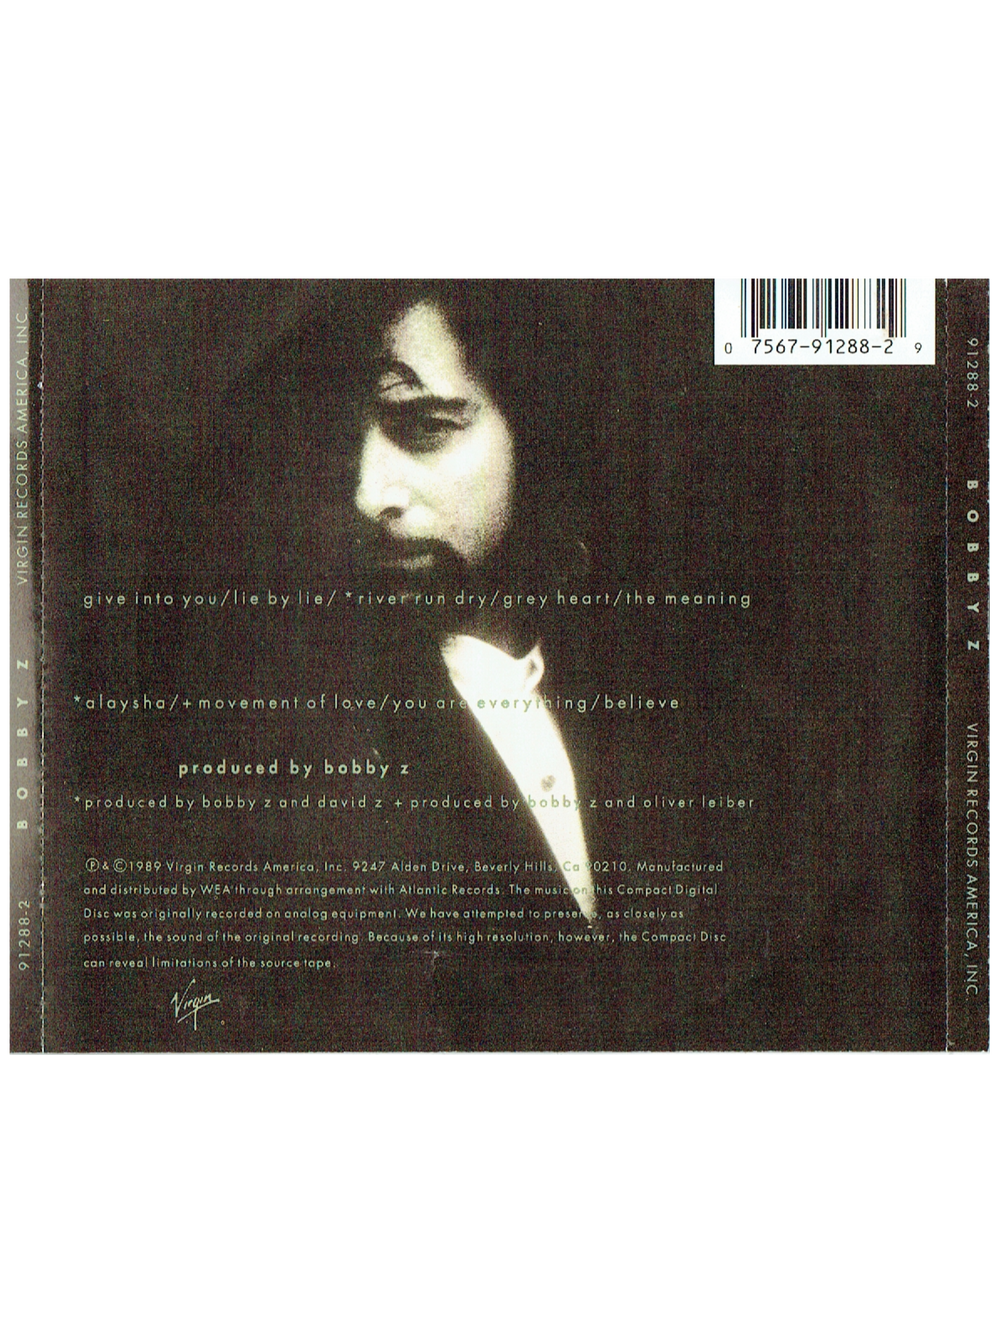 Bobby Z Self Titled Compact Disc Album 1989 USA Release Prince